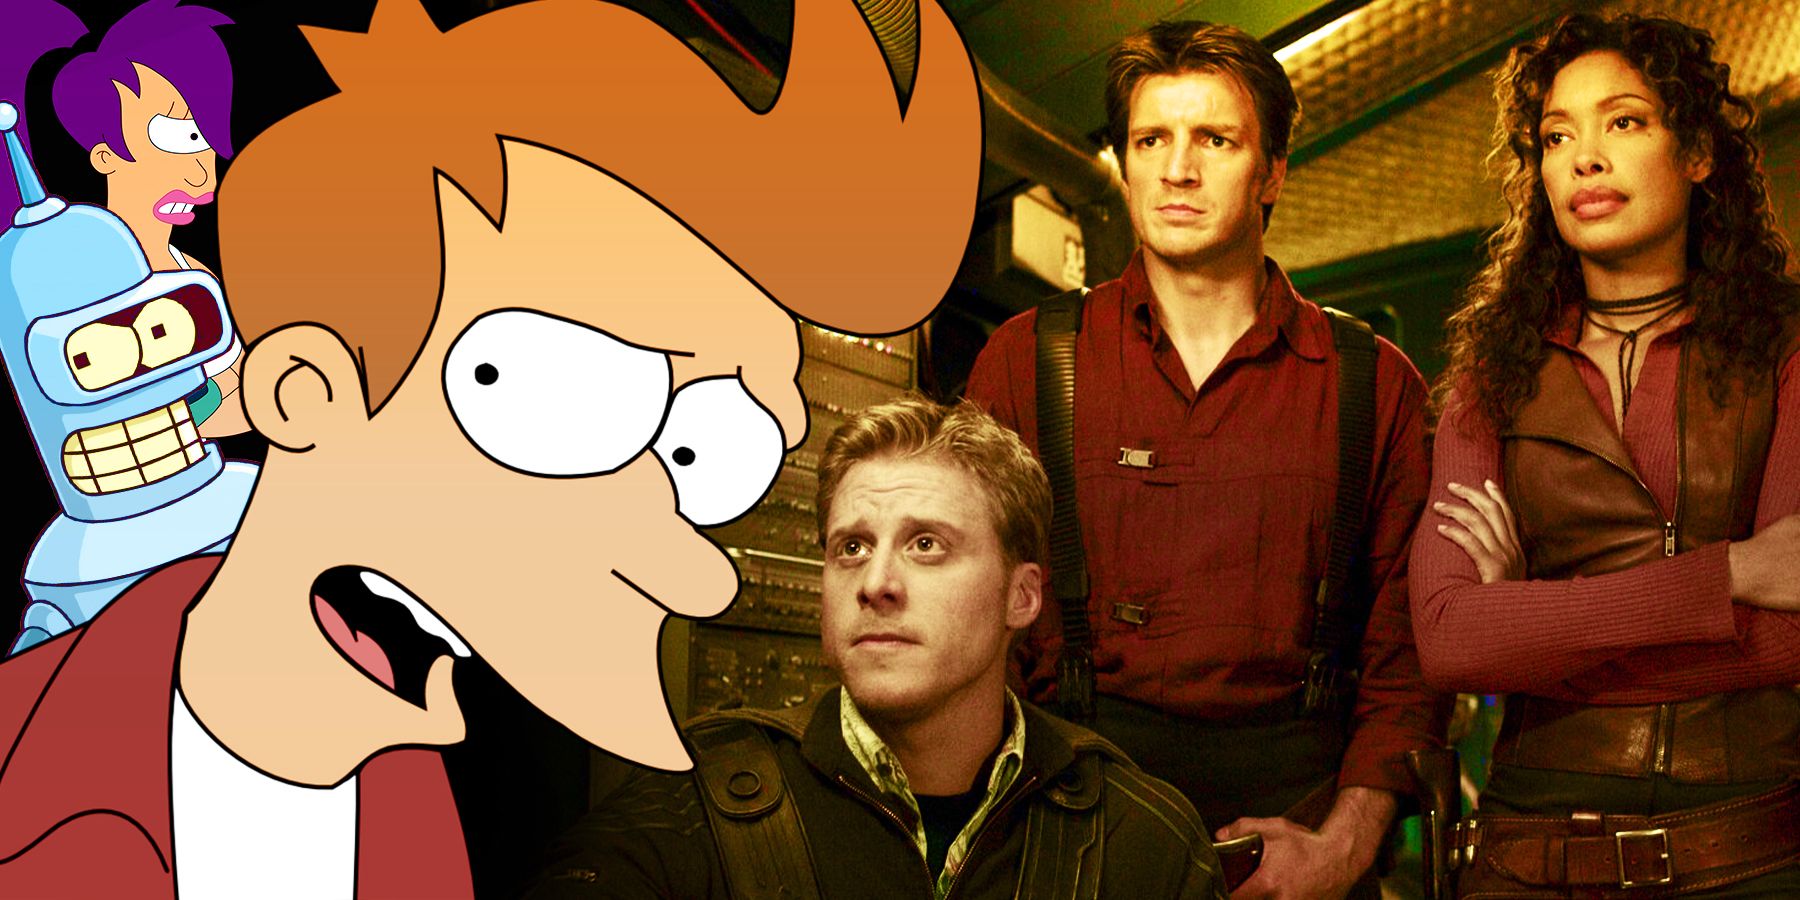 On the left, Fry, Bender and Leela of 'Futurama' pop into the picture looking surprised, happy, and angry. On the right, Wash, Malcolm and Zoe of 'Firefly' sit in their ship looking concerned.